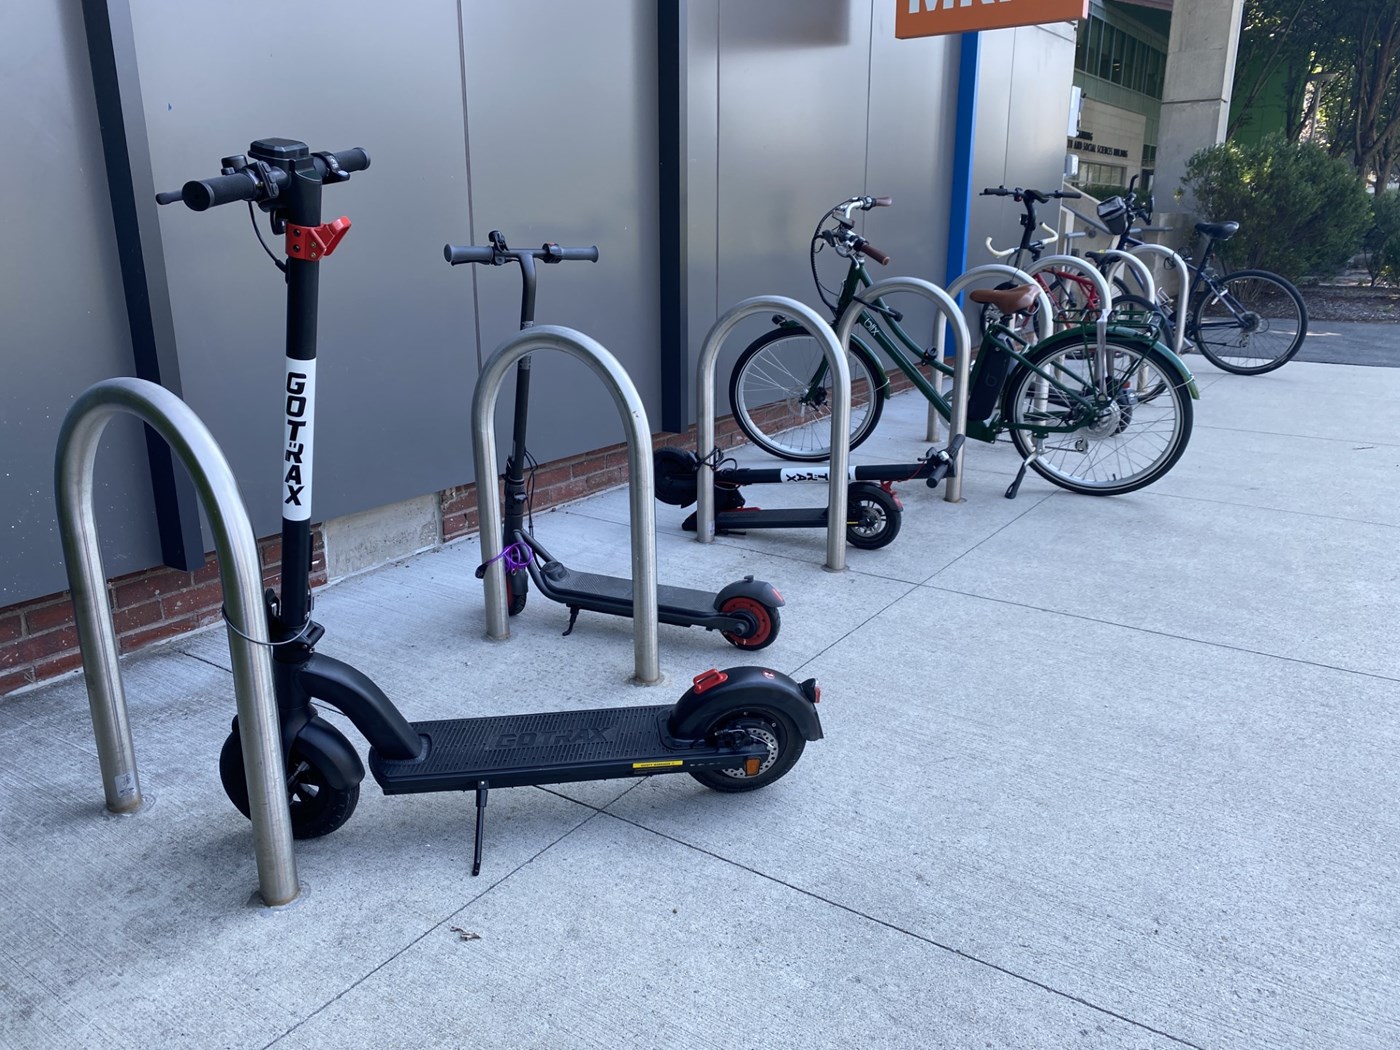 Two scooters followed by several bicycles parking in a row outside.